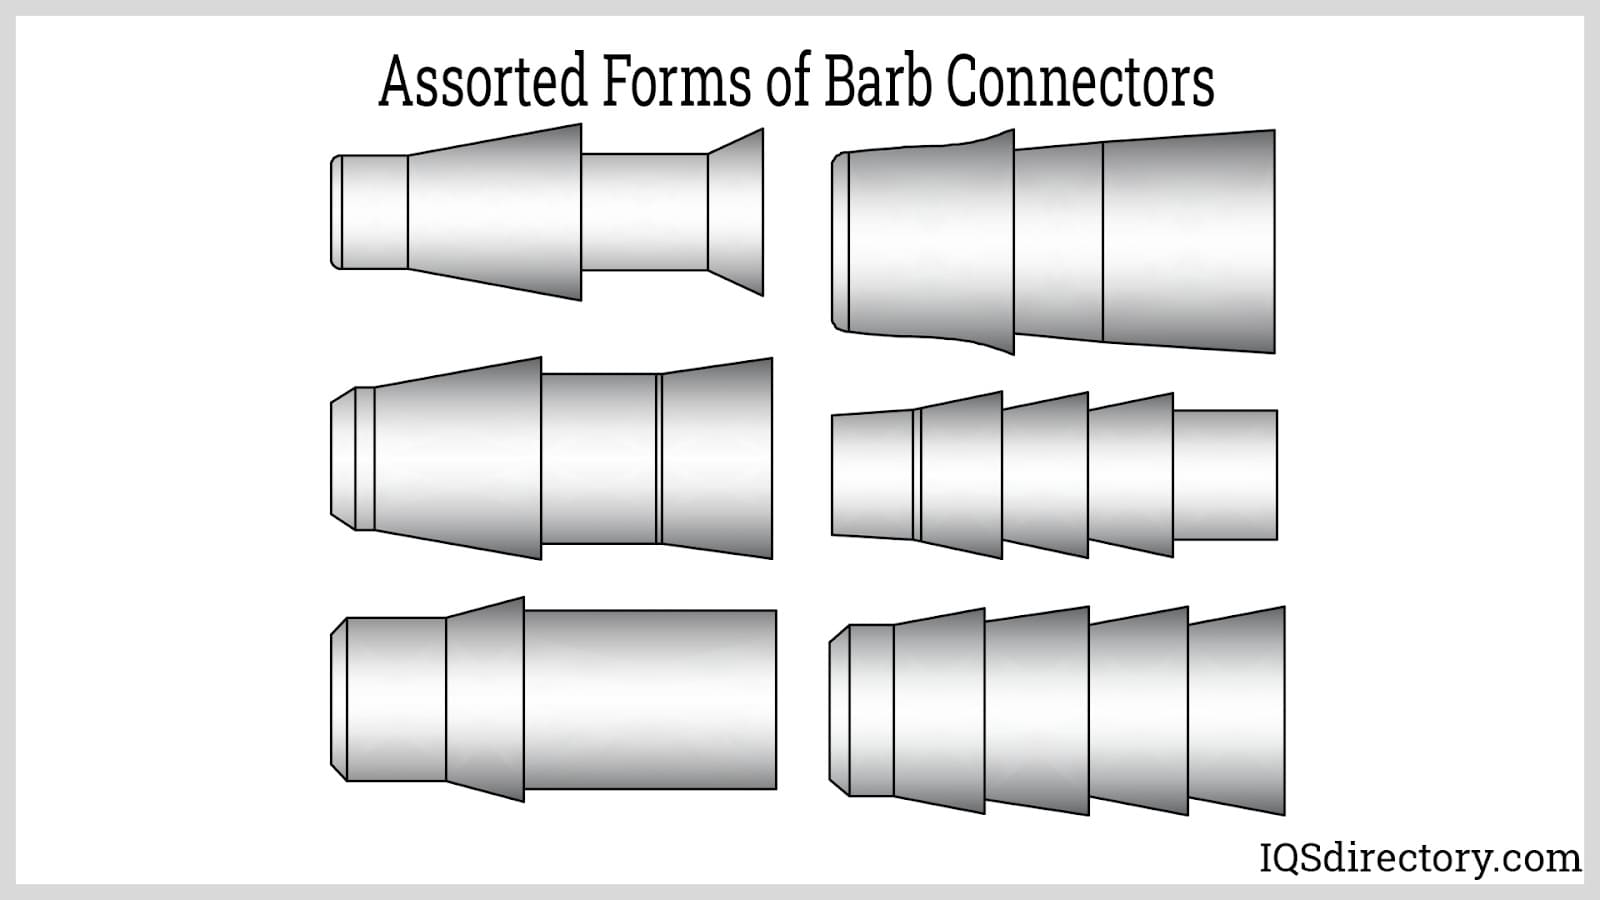 Assorted Forms of Barb Connectors